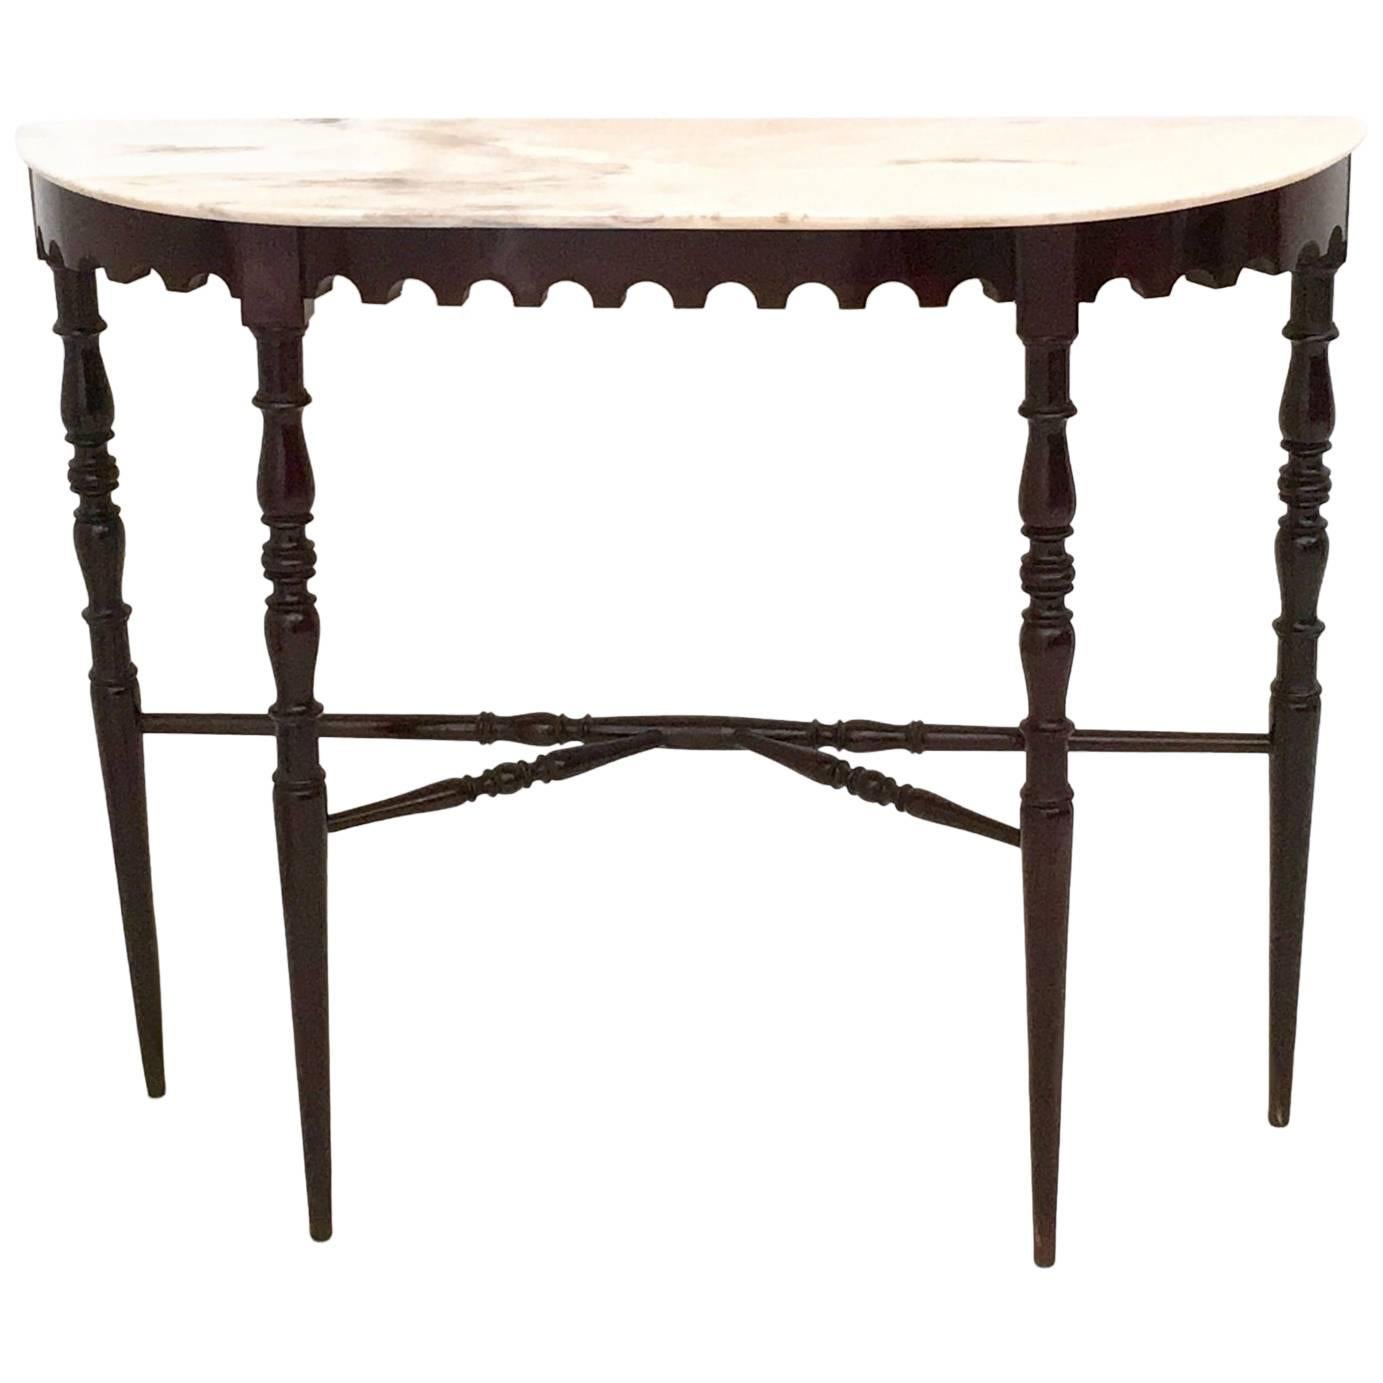 Demilune Ebonized Beech Console Table with a Portuguese Pink Marble Top, 1950s